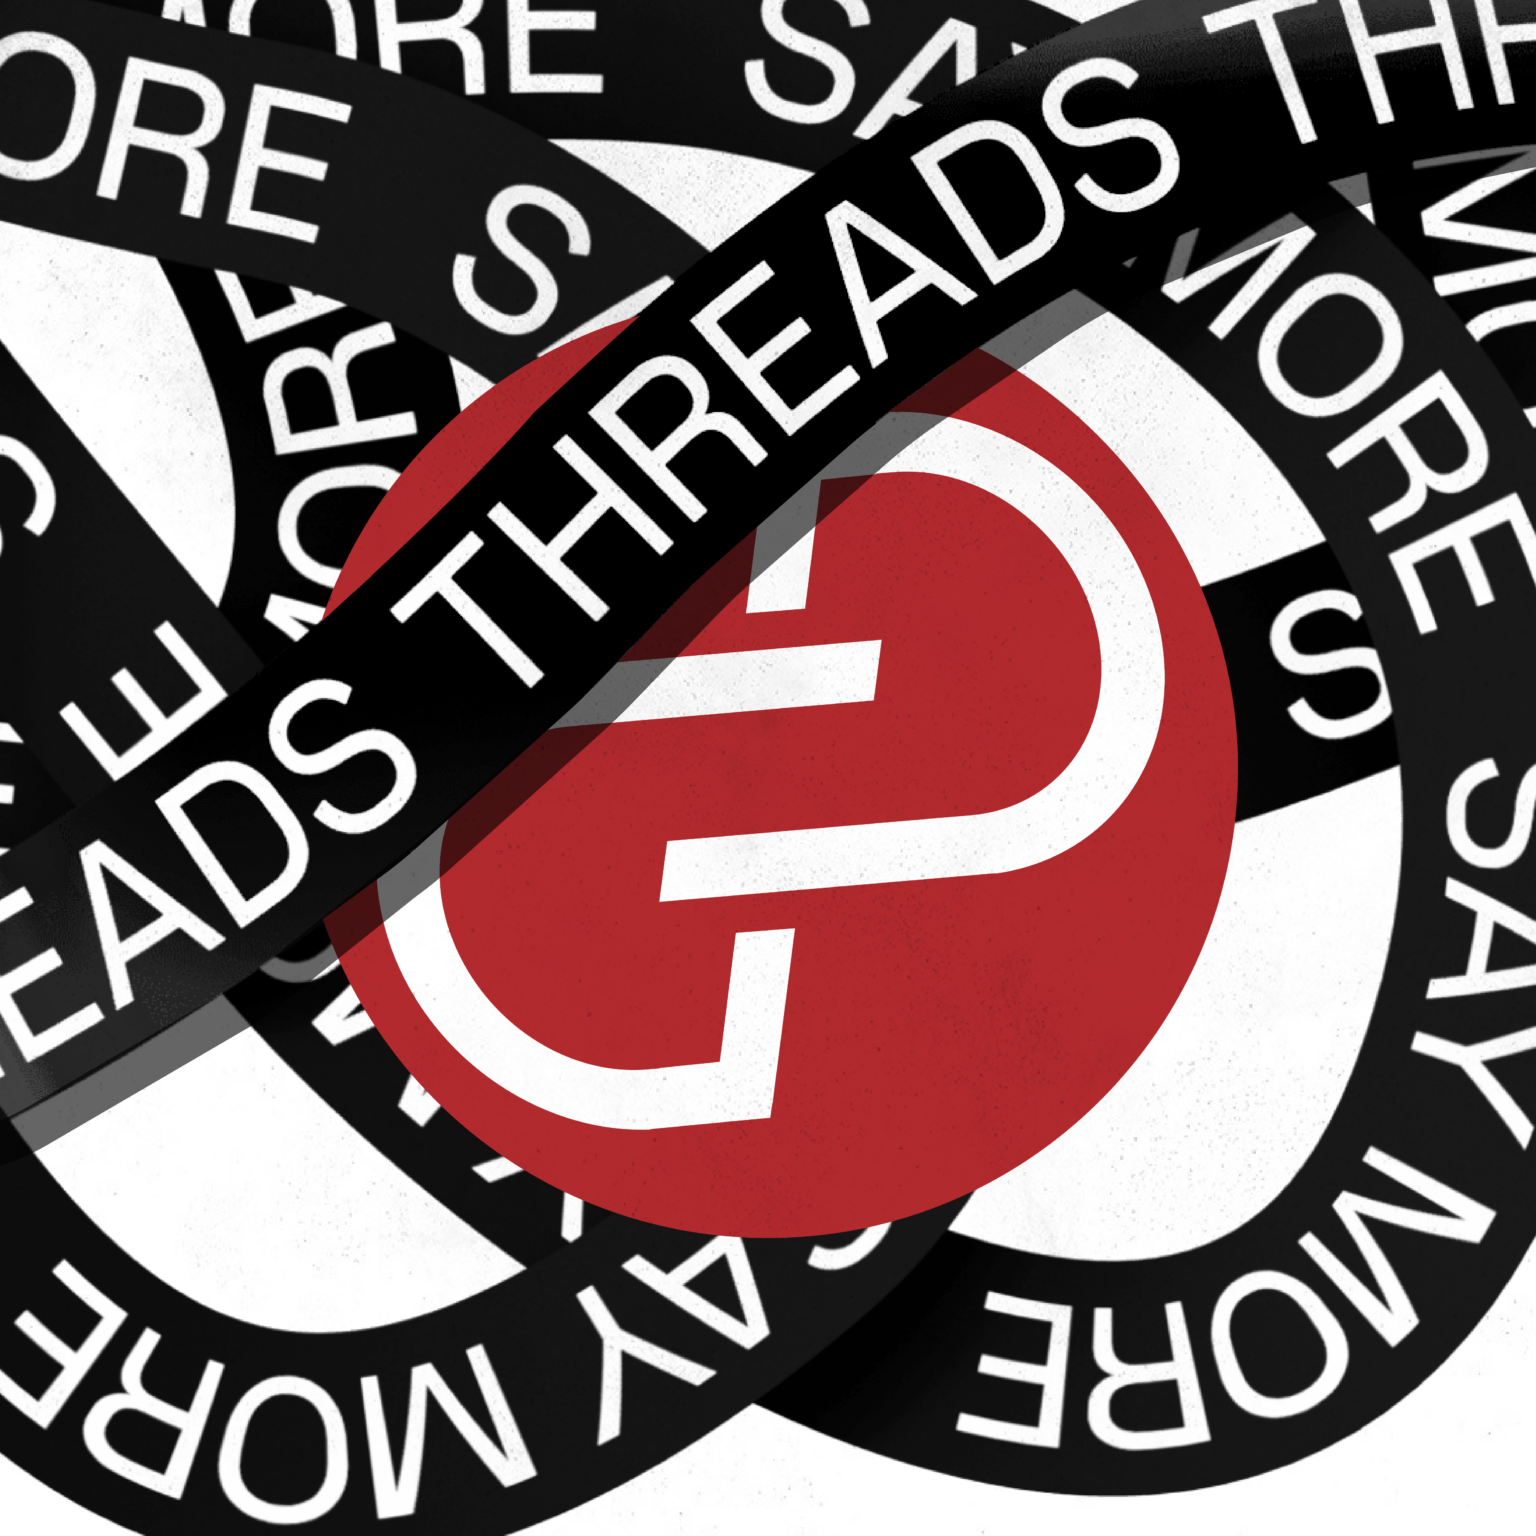 A red circular logo with white text forming a "G" and "P". That logo is surrounded by curved black lines with white words saying "say more." There is one black curved line over the round red logo with the word "threads" repeated on it.